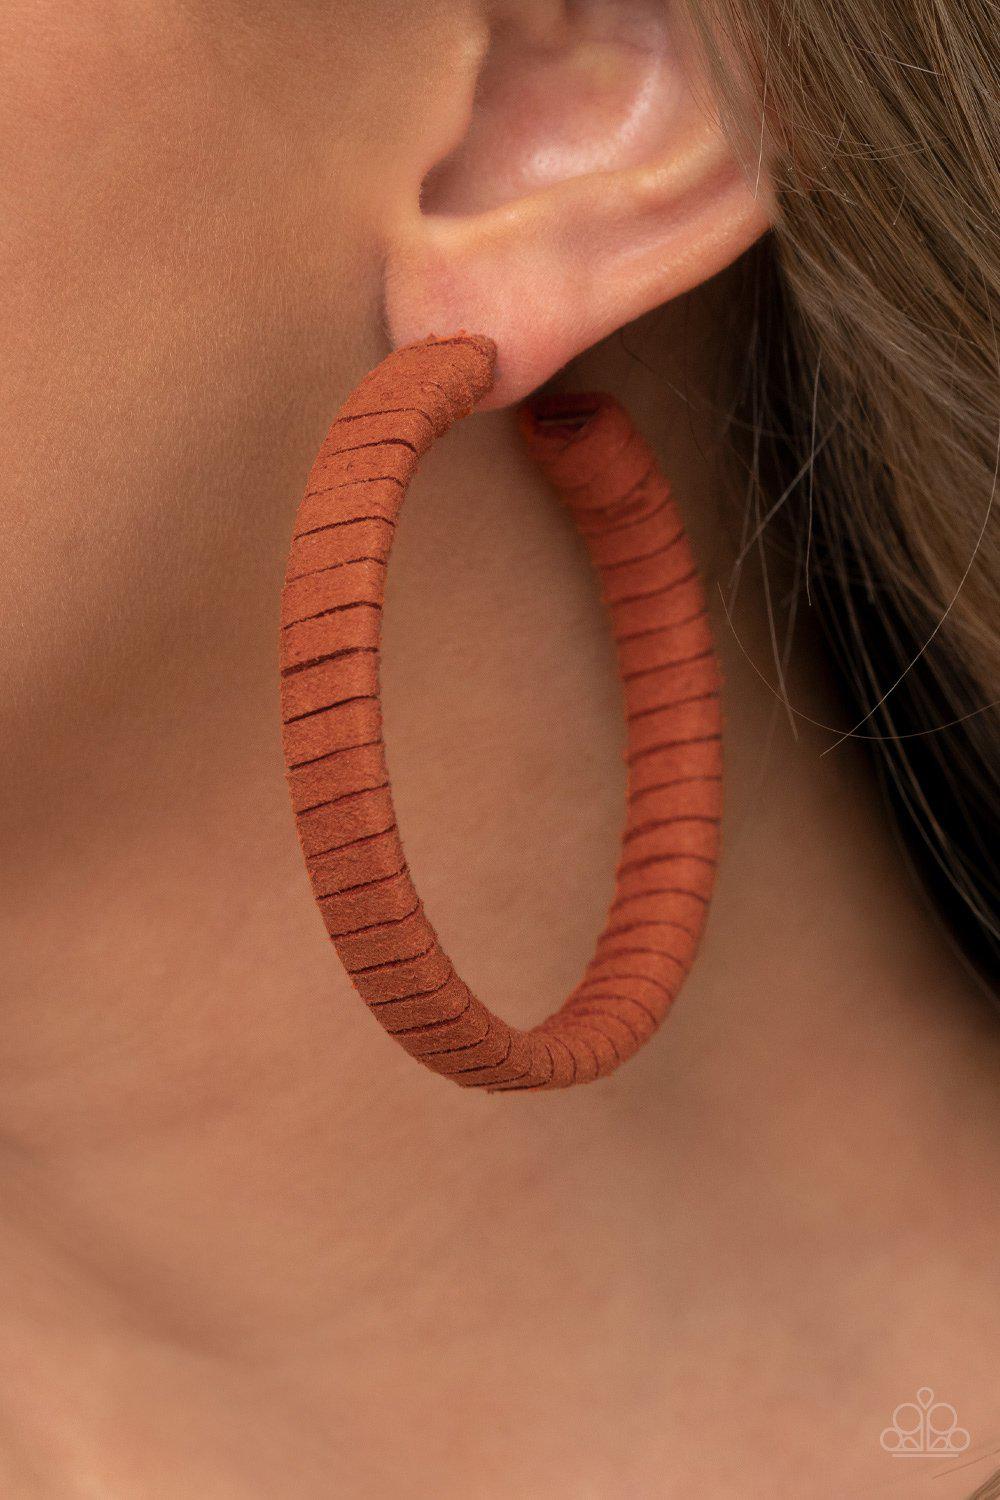 Suede Parade Orange Suede Hoop Earrings - Paparazzi Accessories- model - CarasShop.com - $5 Jewelry by Cara Jewels